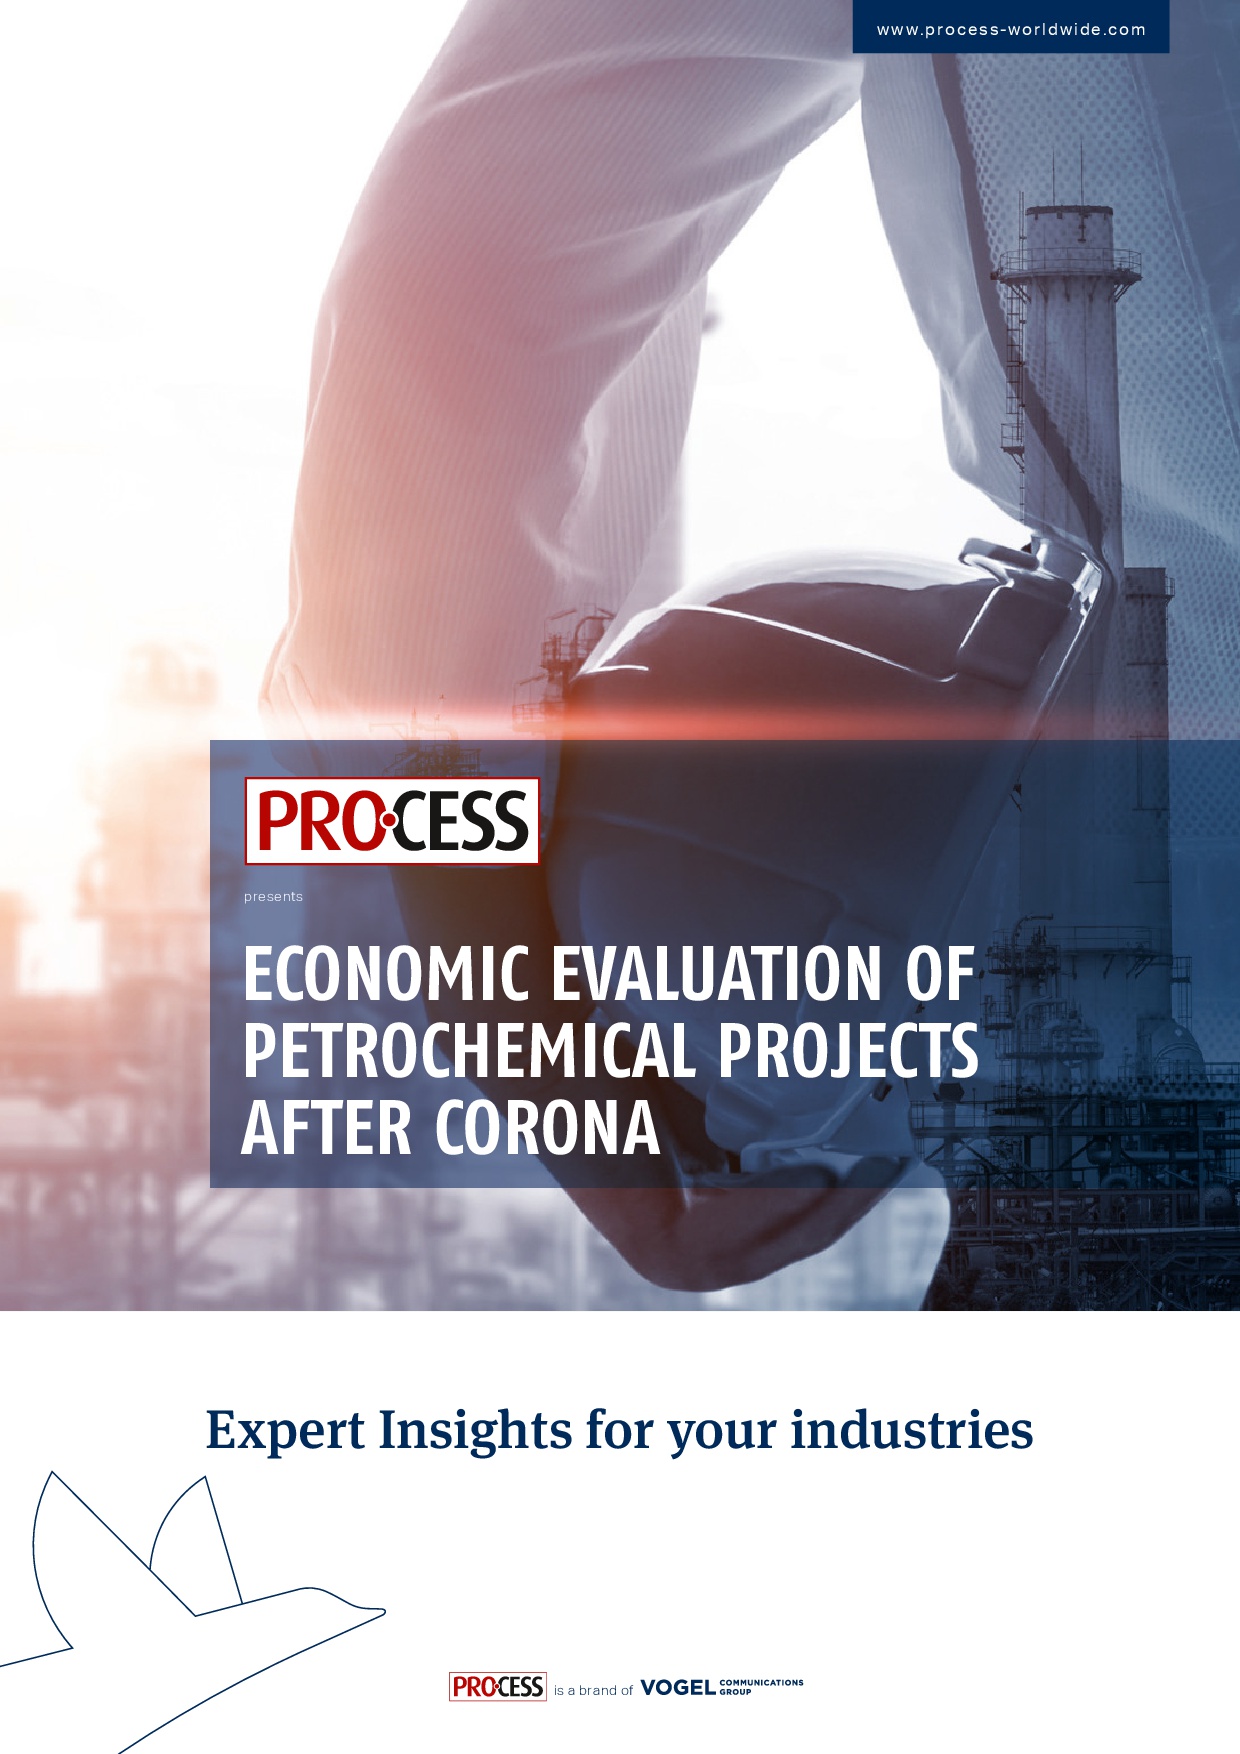 PROCESS Insights: Economic Evaluation of Petrochemical Projects after Corona